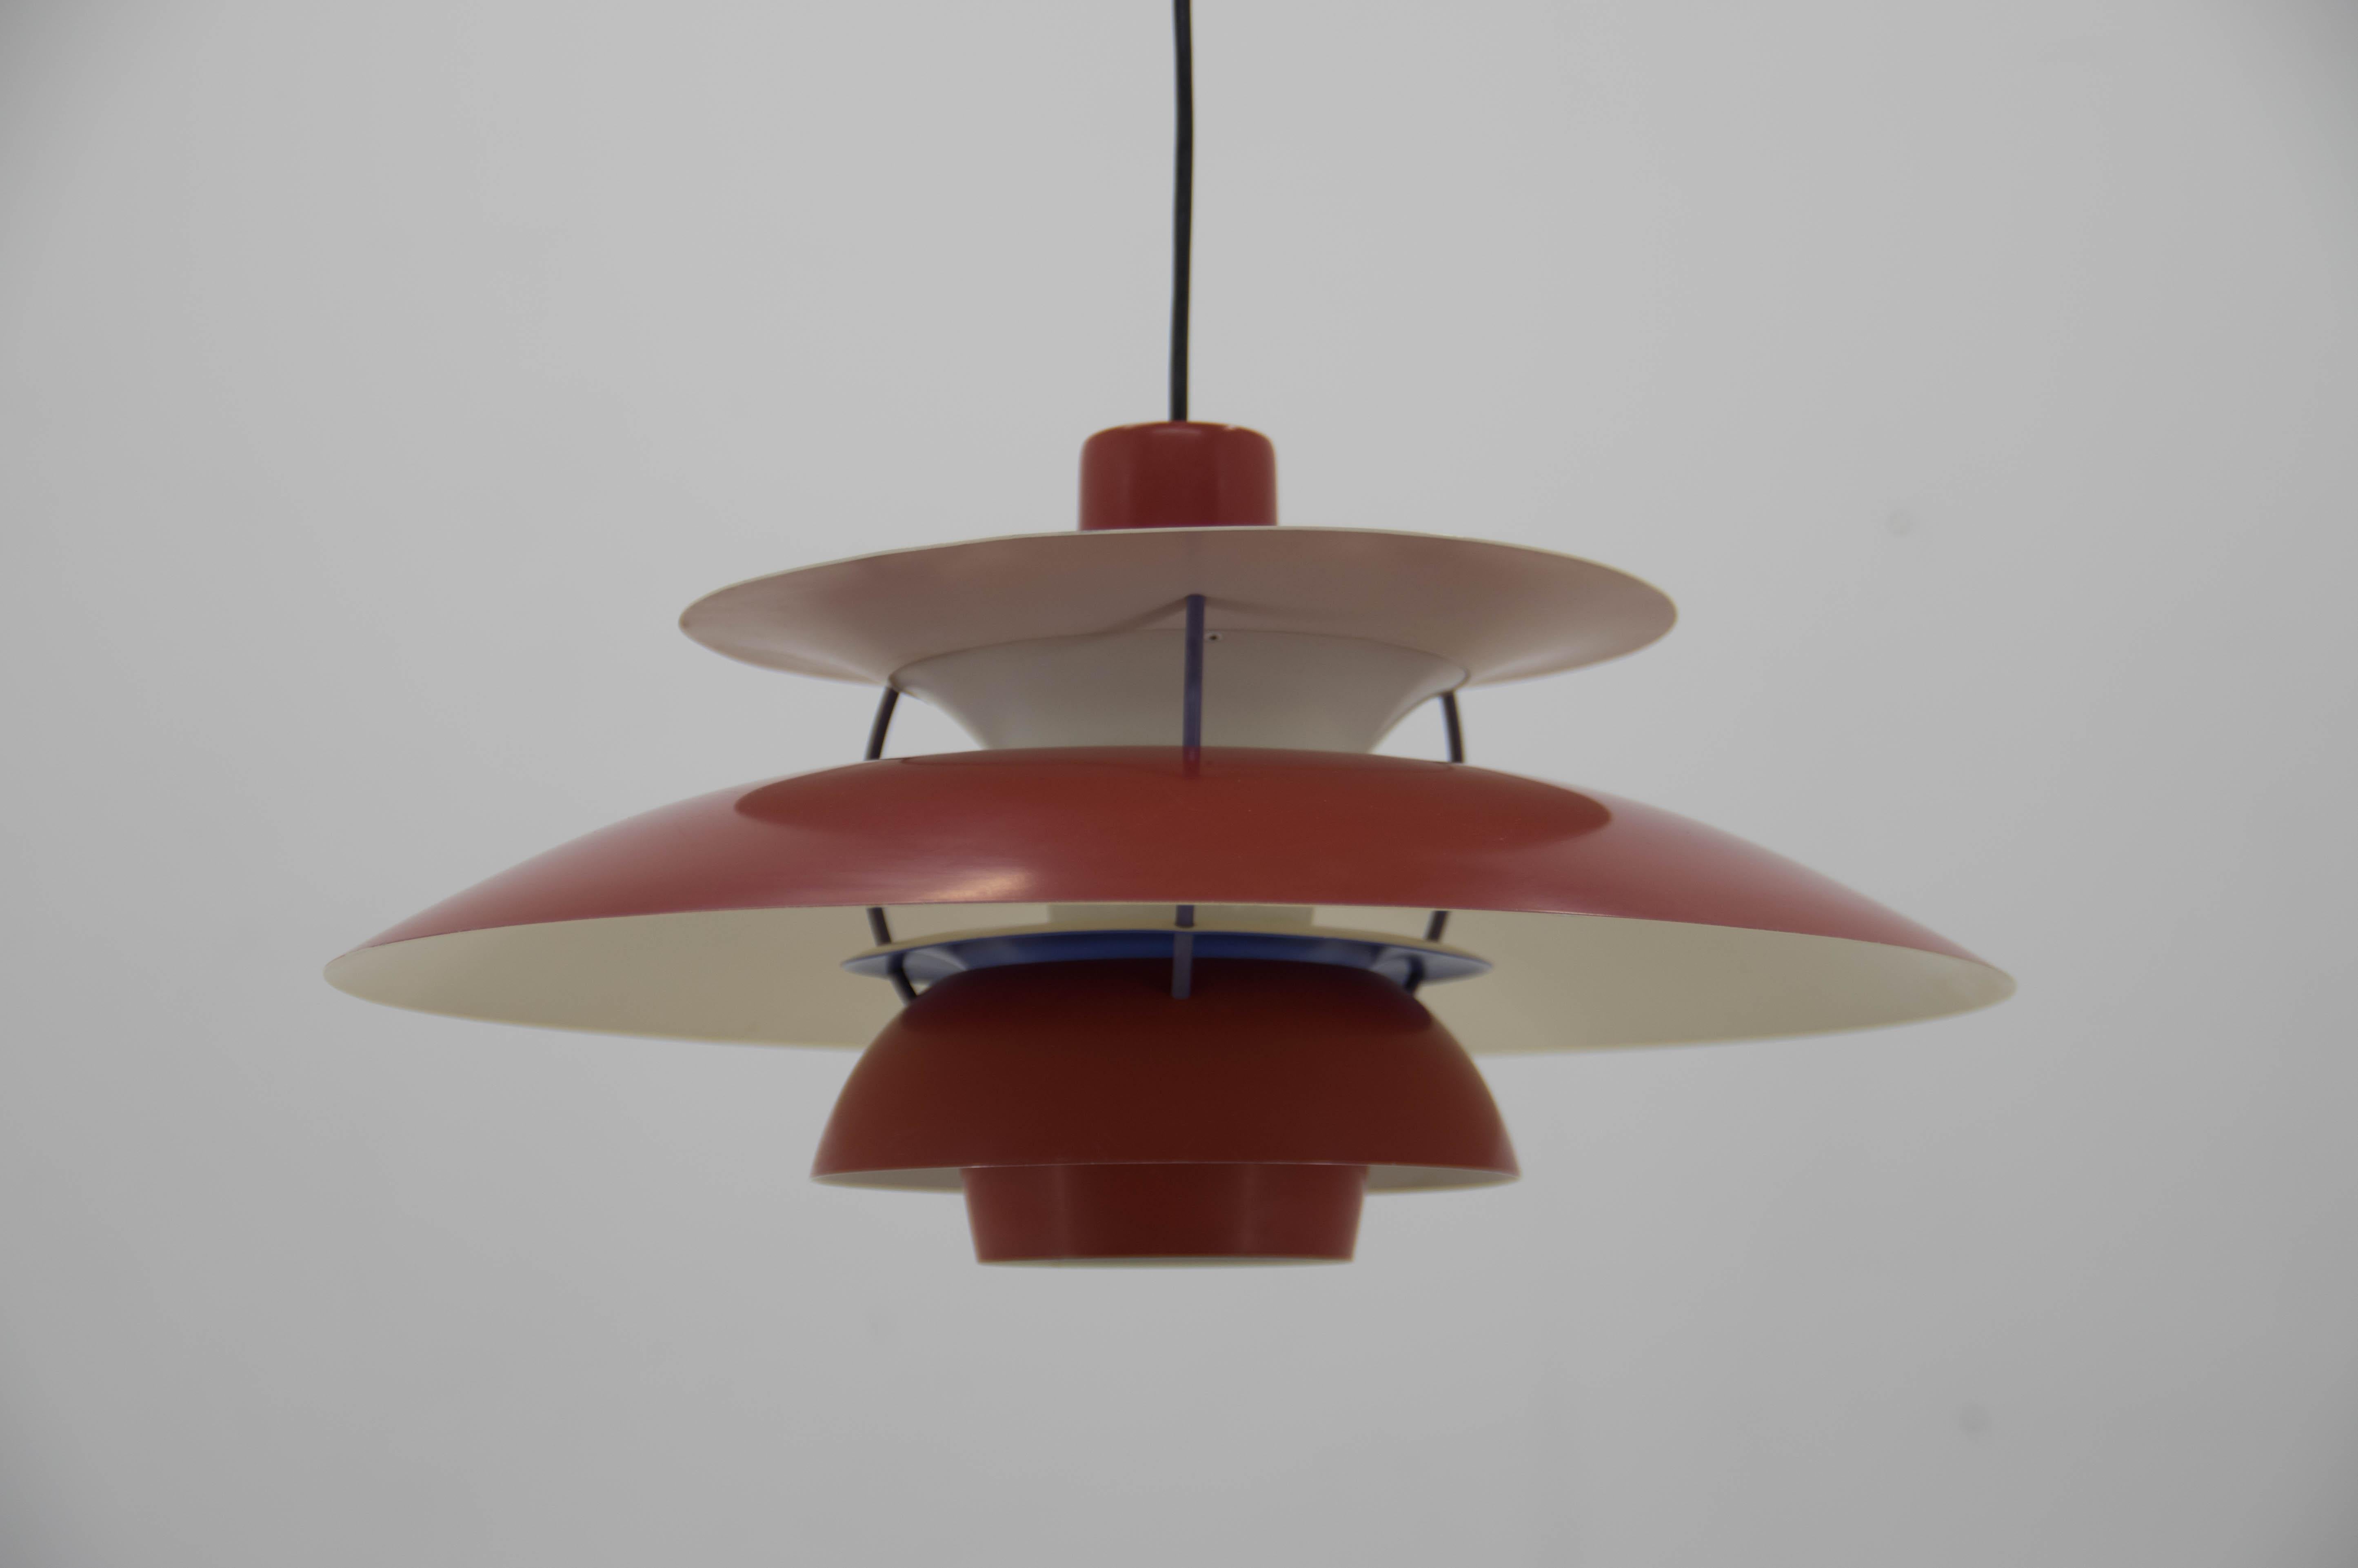 One of the most famous light by Poul Henningsen, designed for Louis Poulsen, Denmark. Very good original condition. One lighter spot on upper side see photo.
1x100W, E25-E27 bulb
US wiring compatible